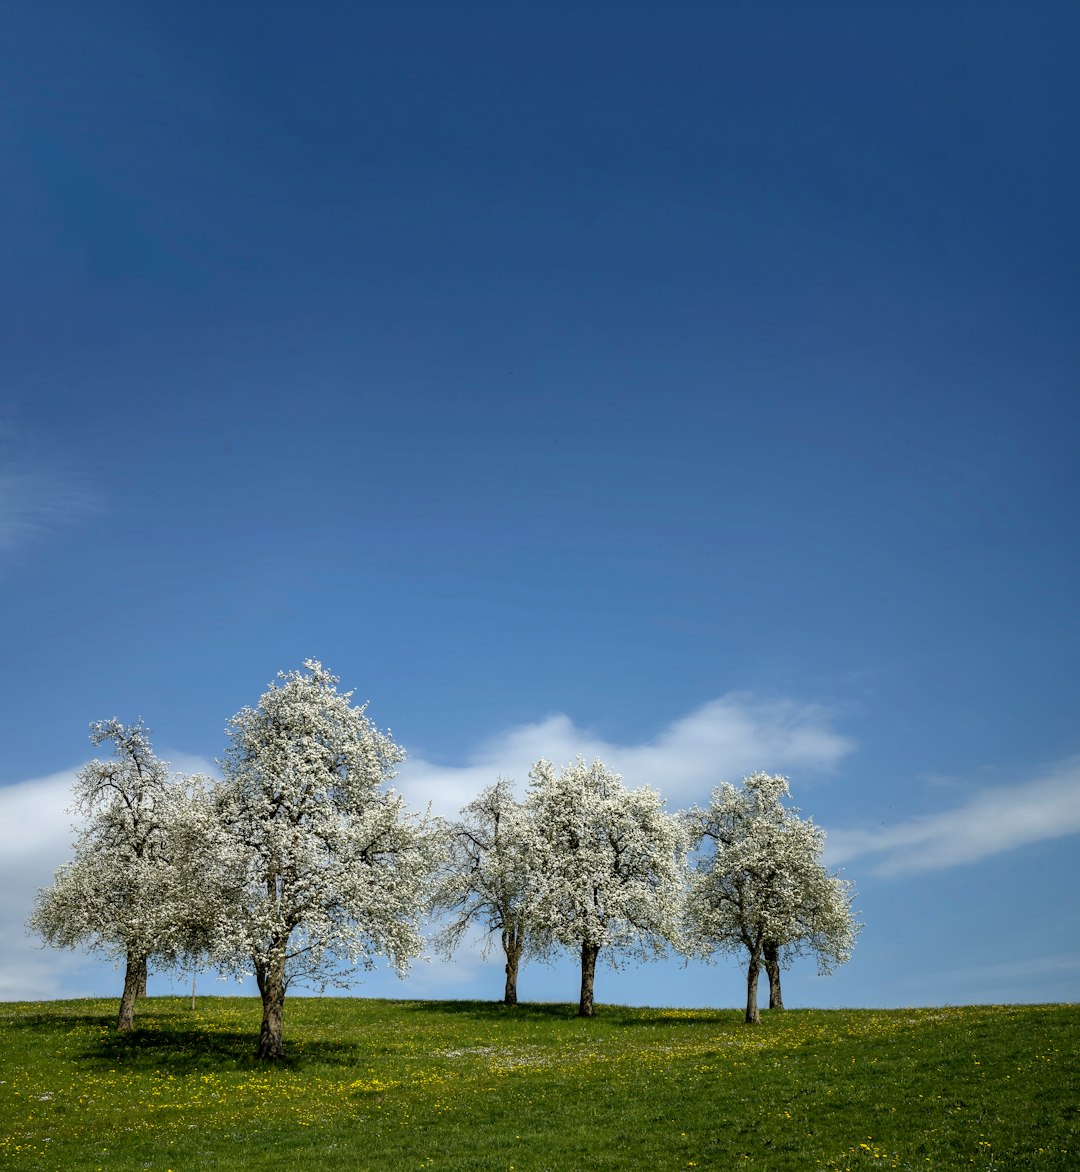 green trees on green grass field under blue sky during daytime